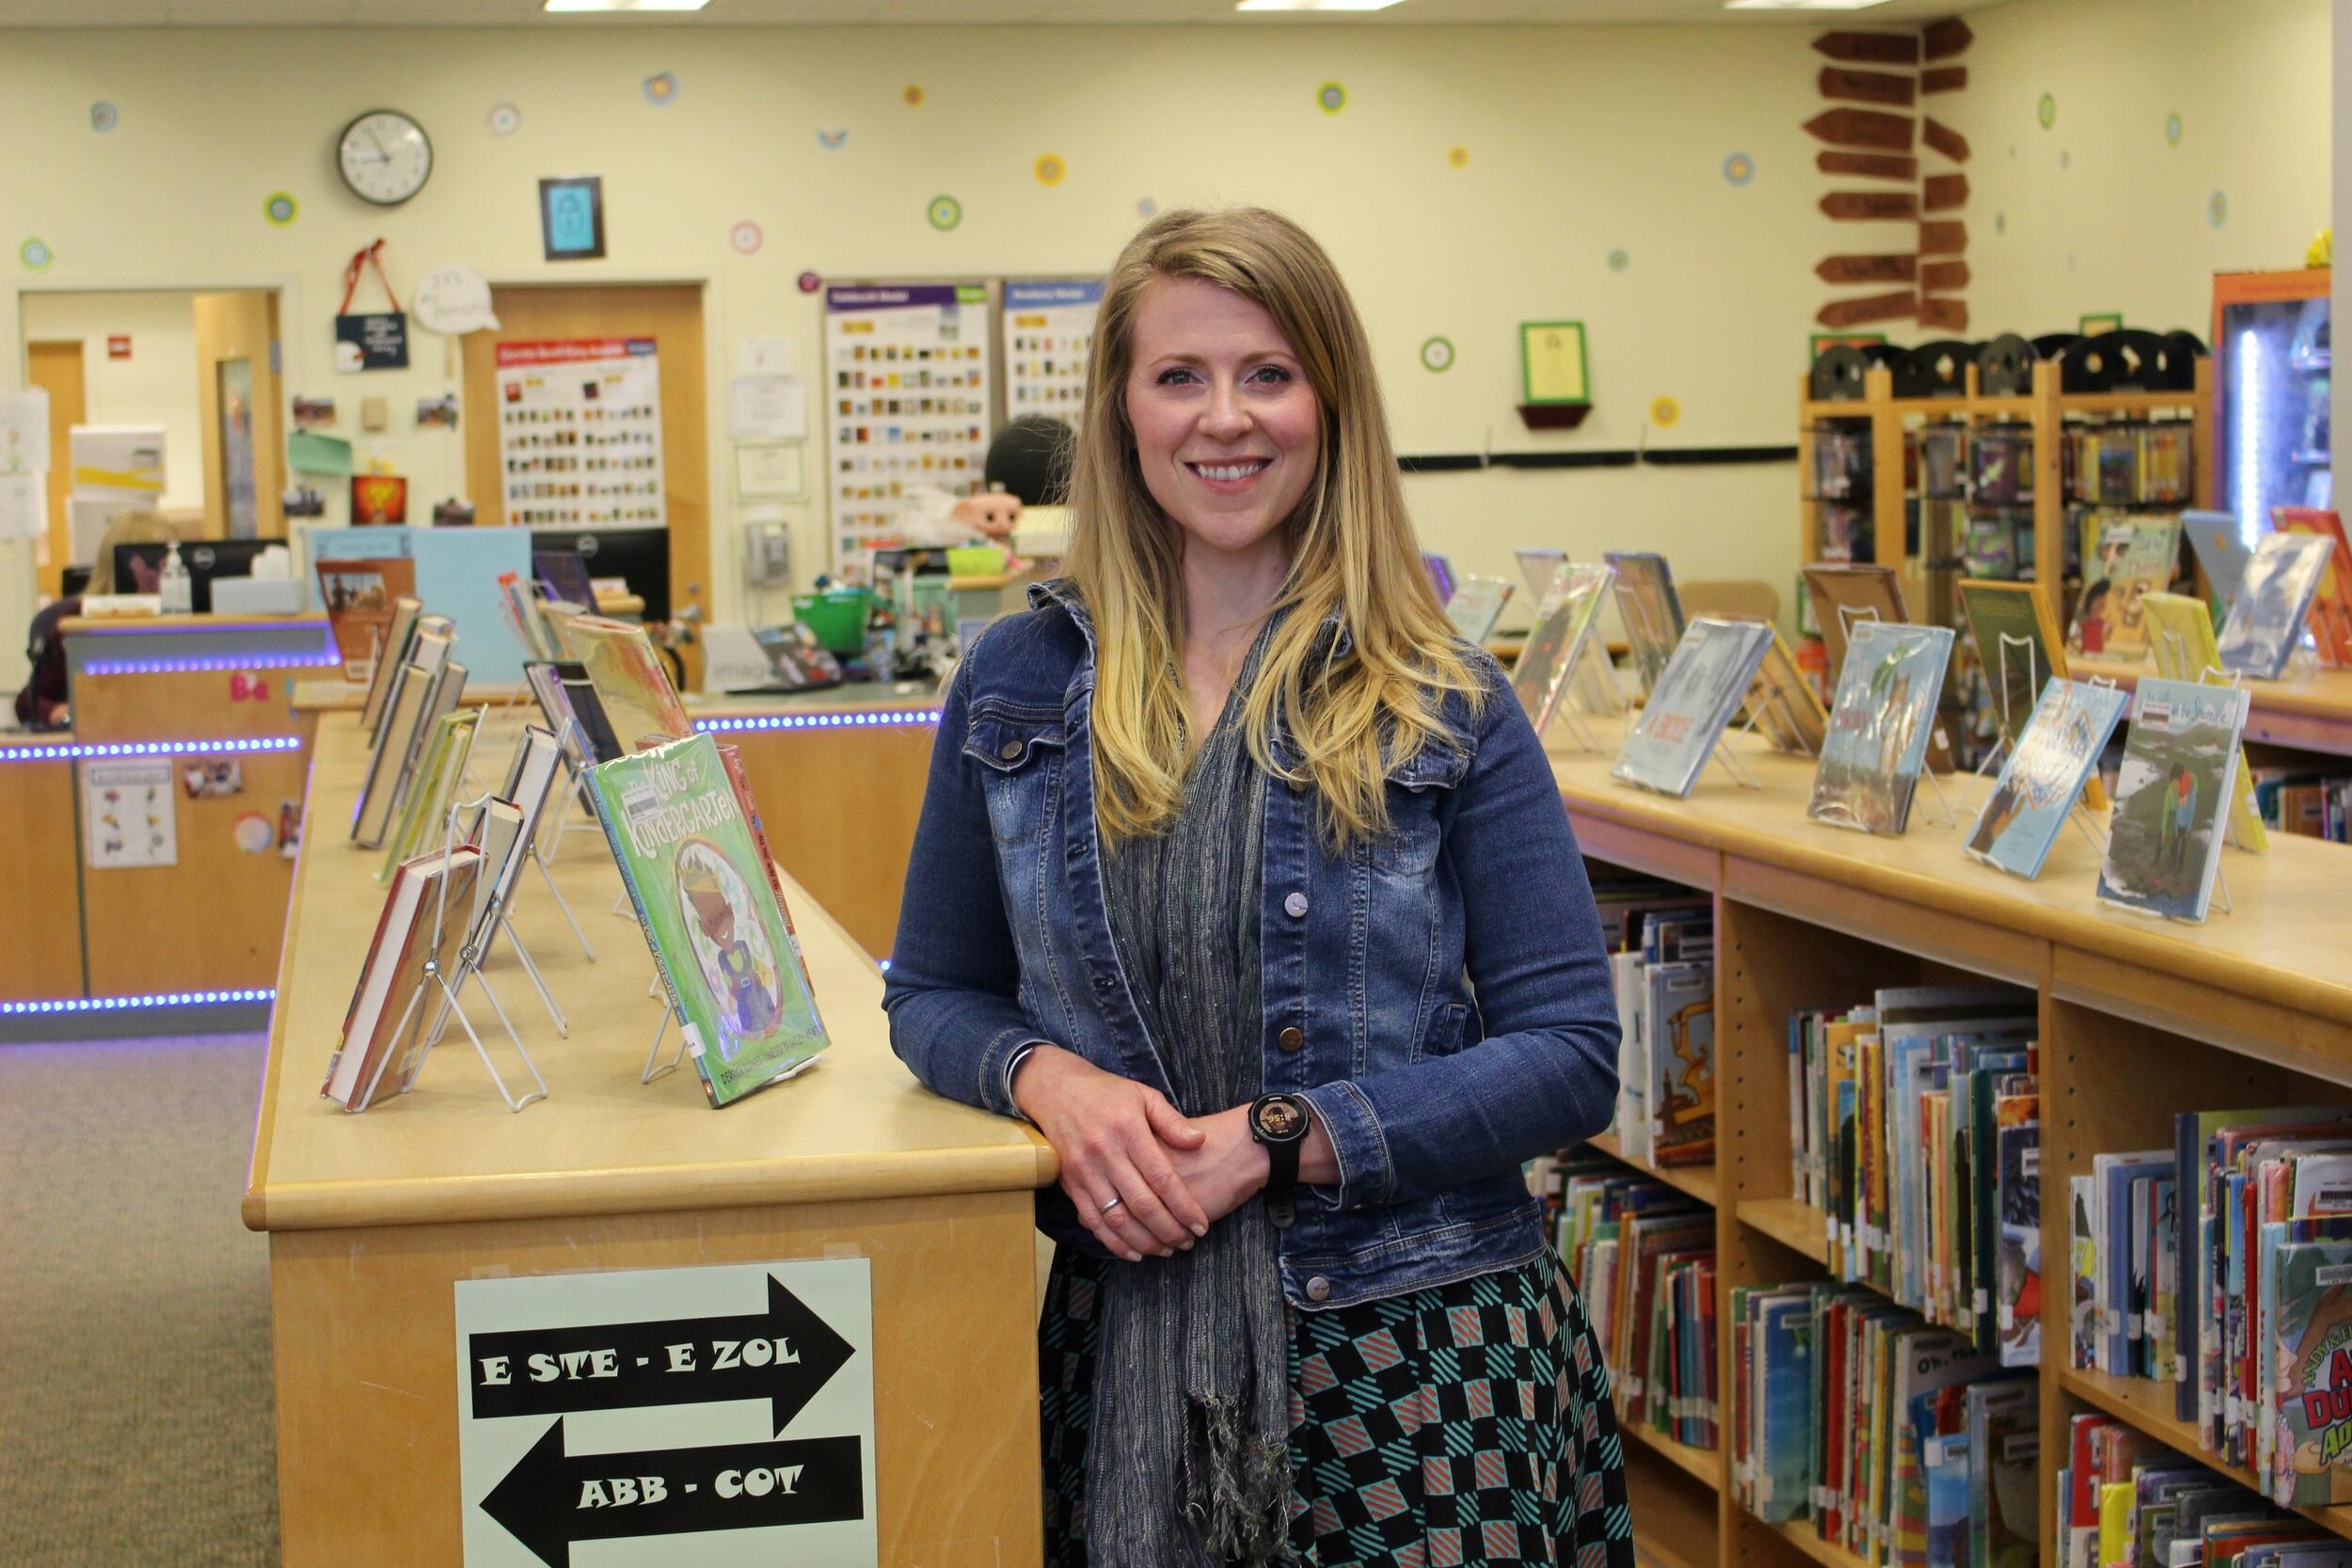 Holly Guelig leaning against a bookshelf in a grade school library 